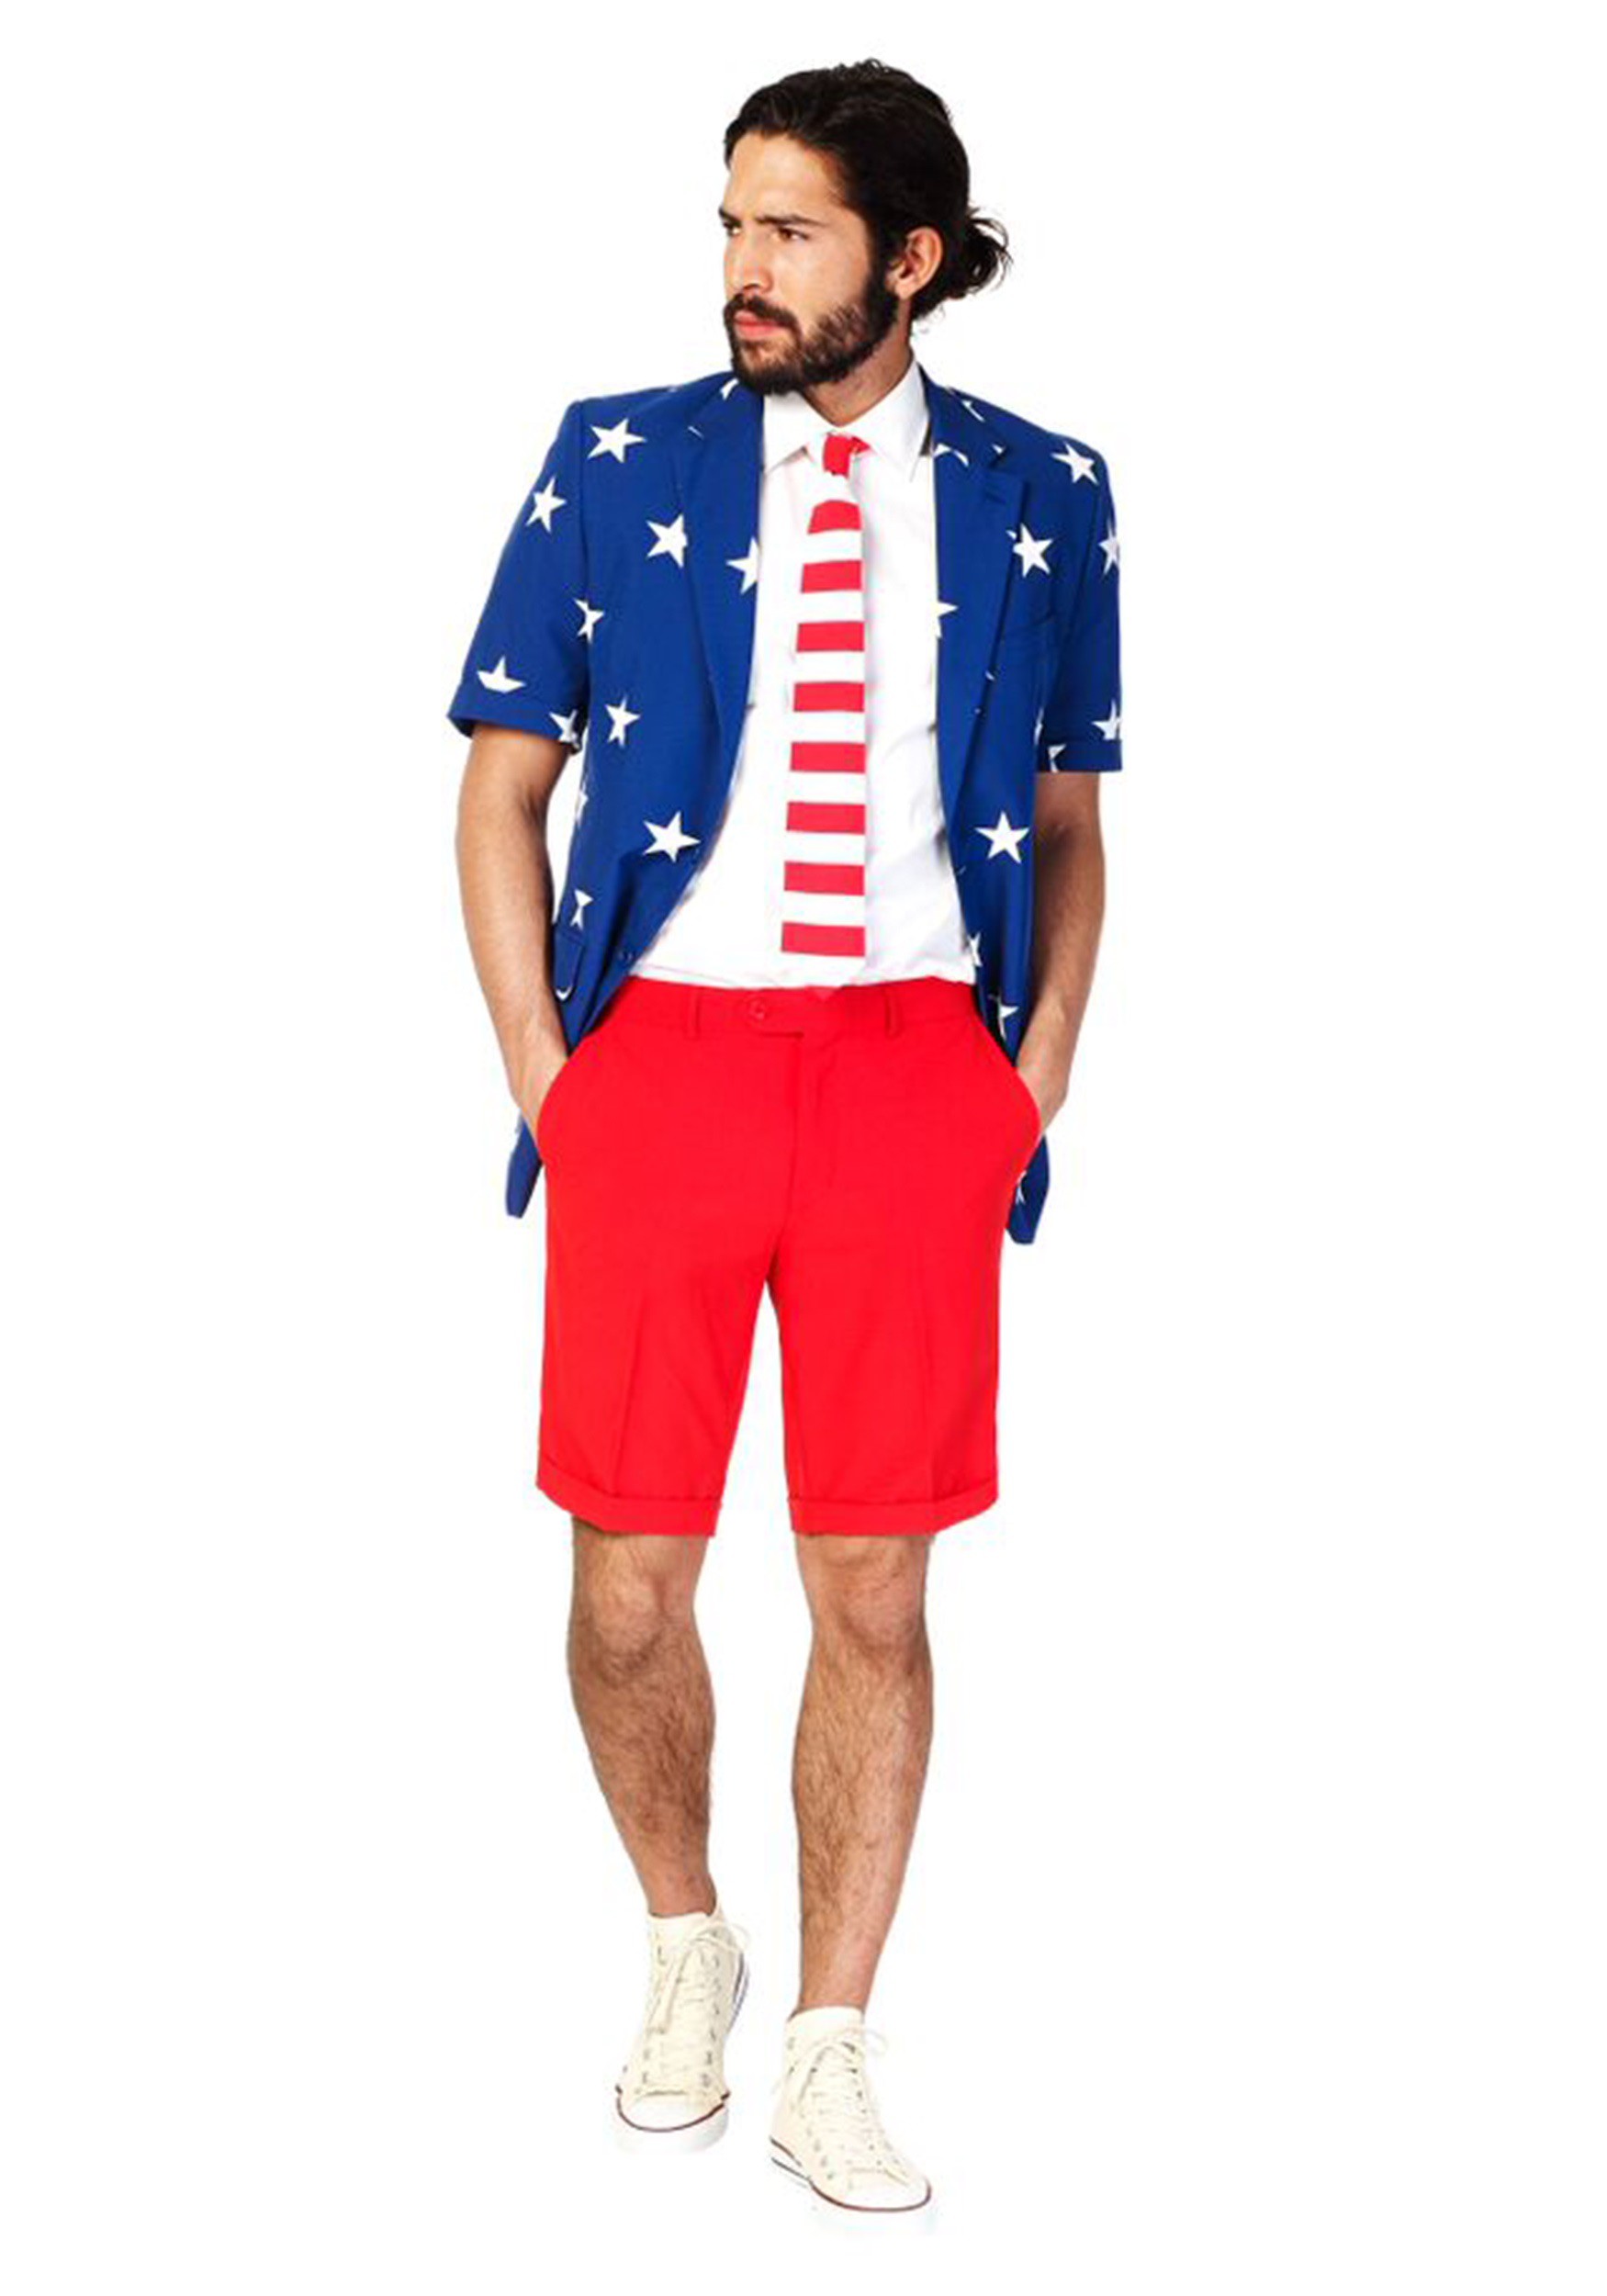 Image of OppoSuits Stars & Stripes Summer Suit Men's Costume ID OSOSUM0006-40